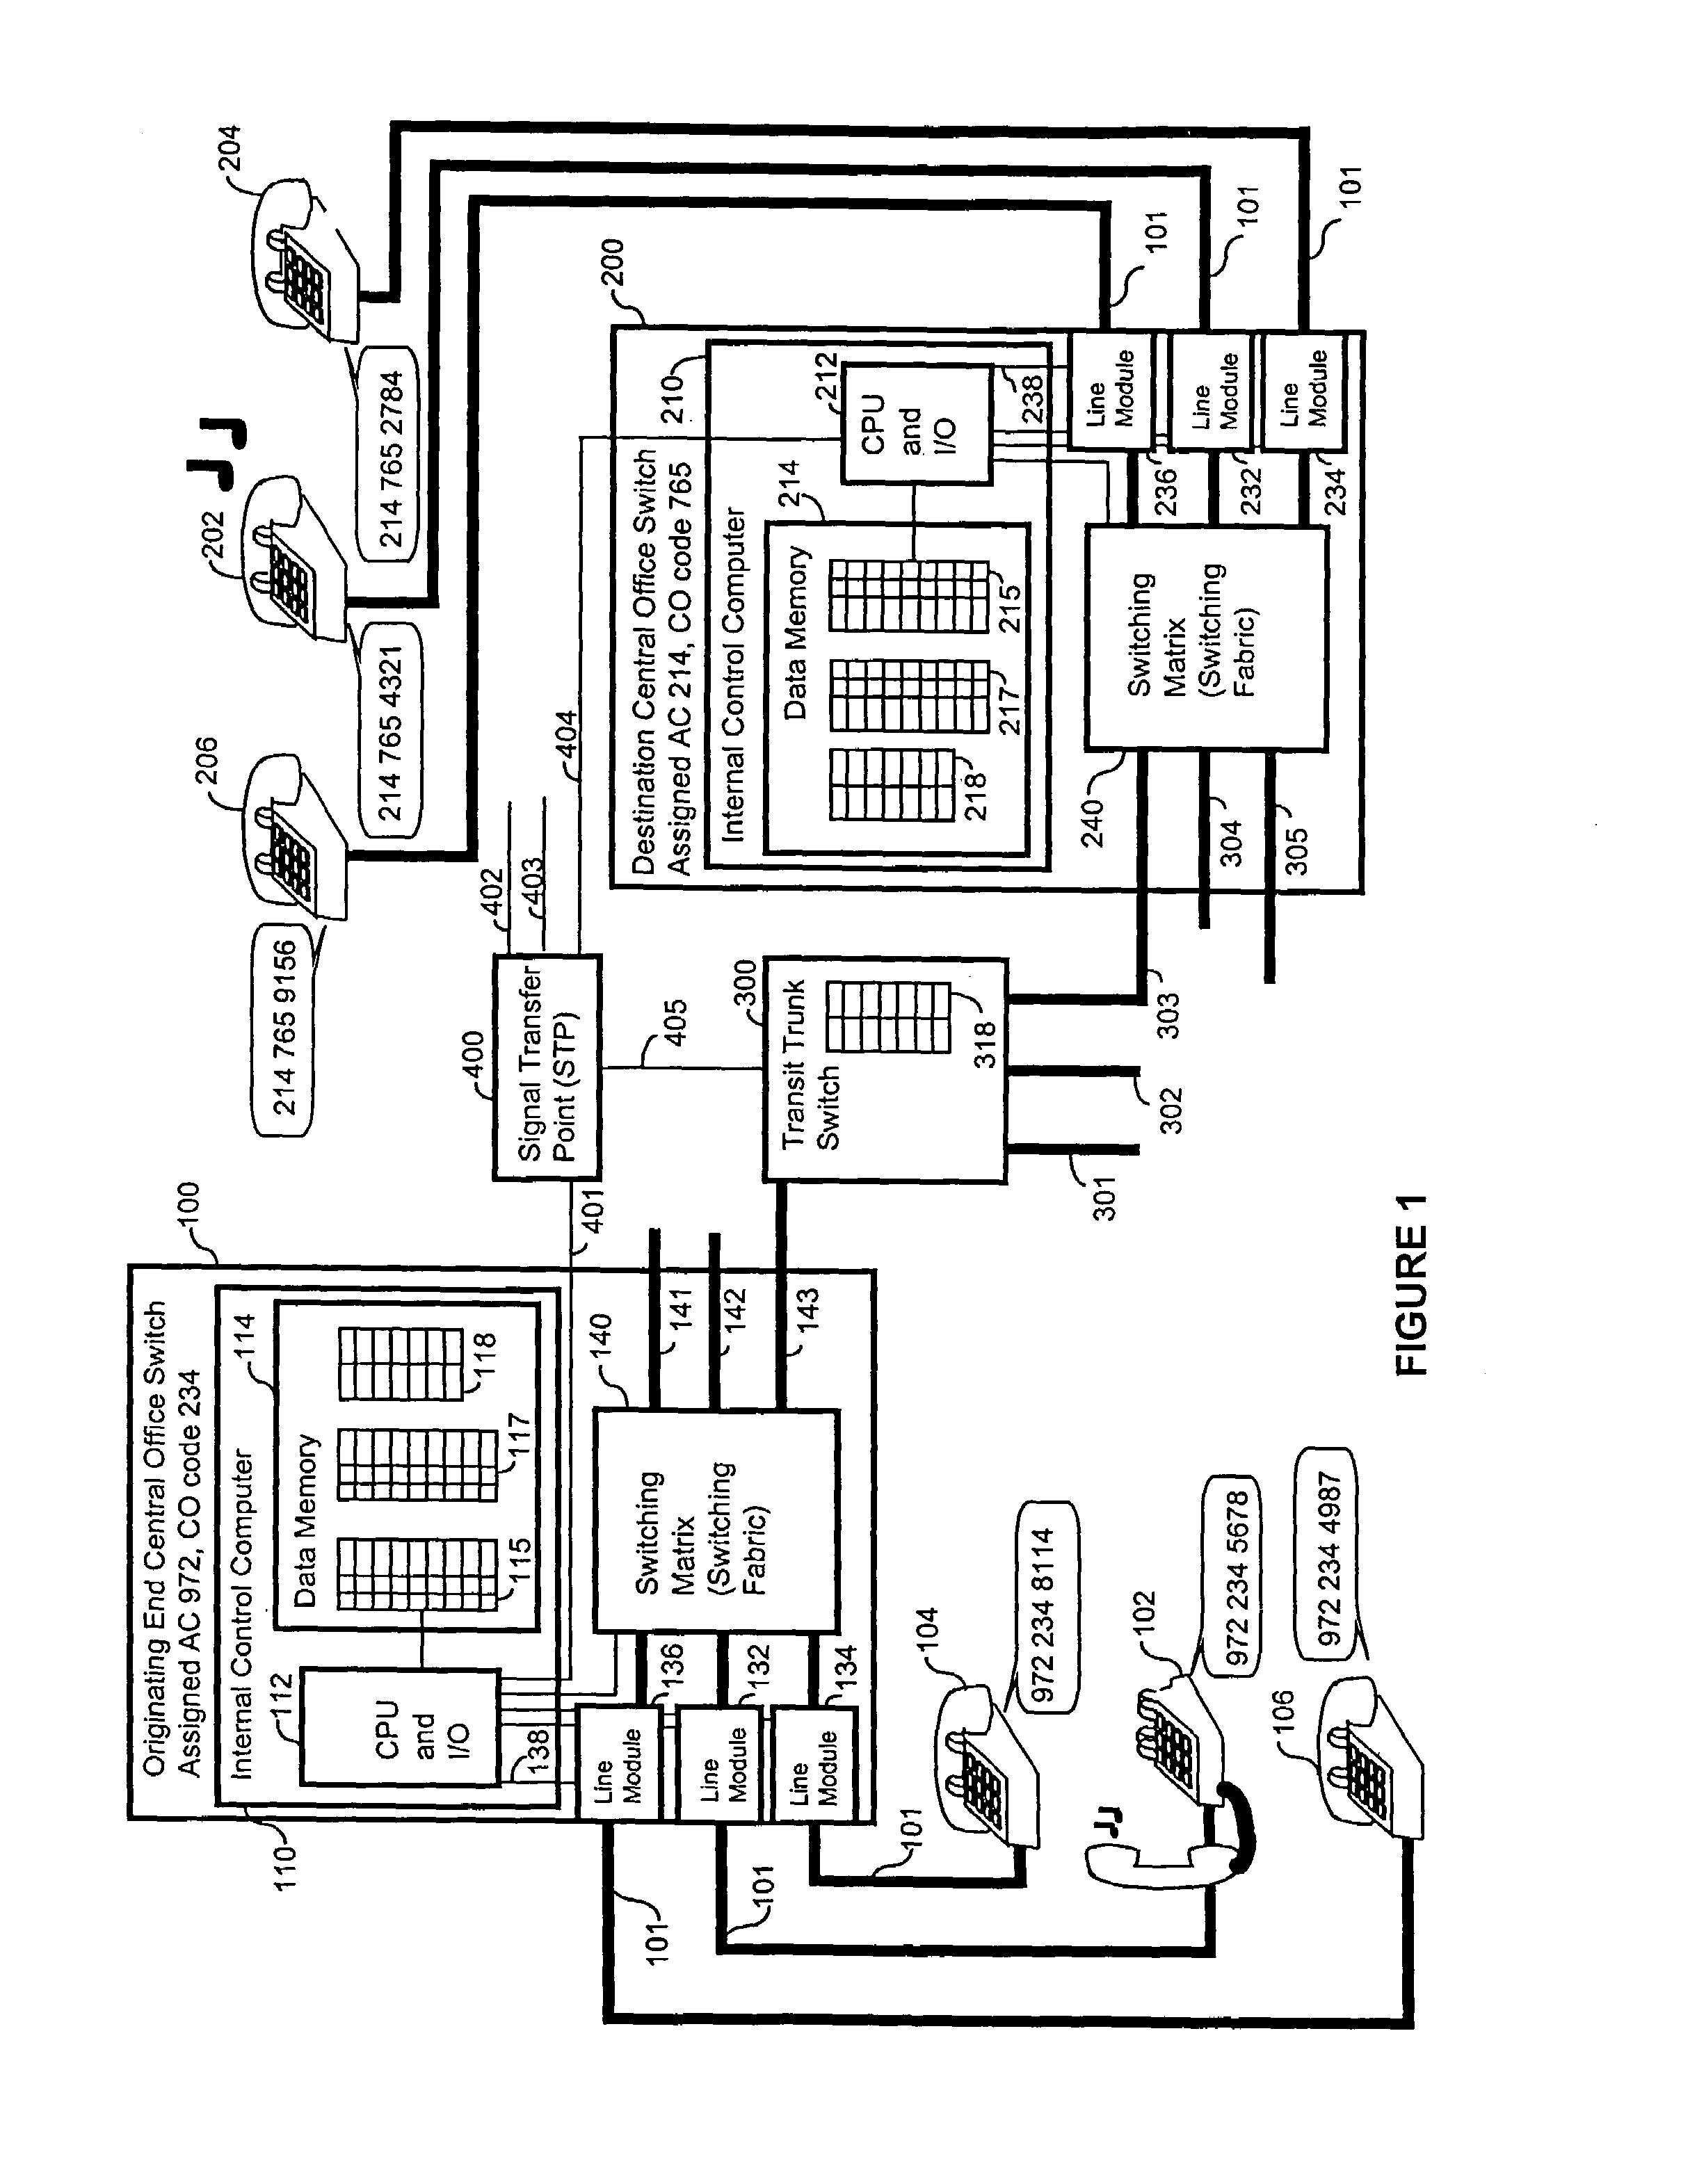 System and method of network addressing and translation in a transportation system